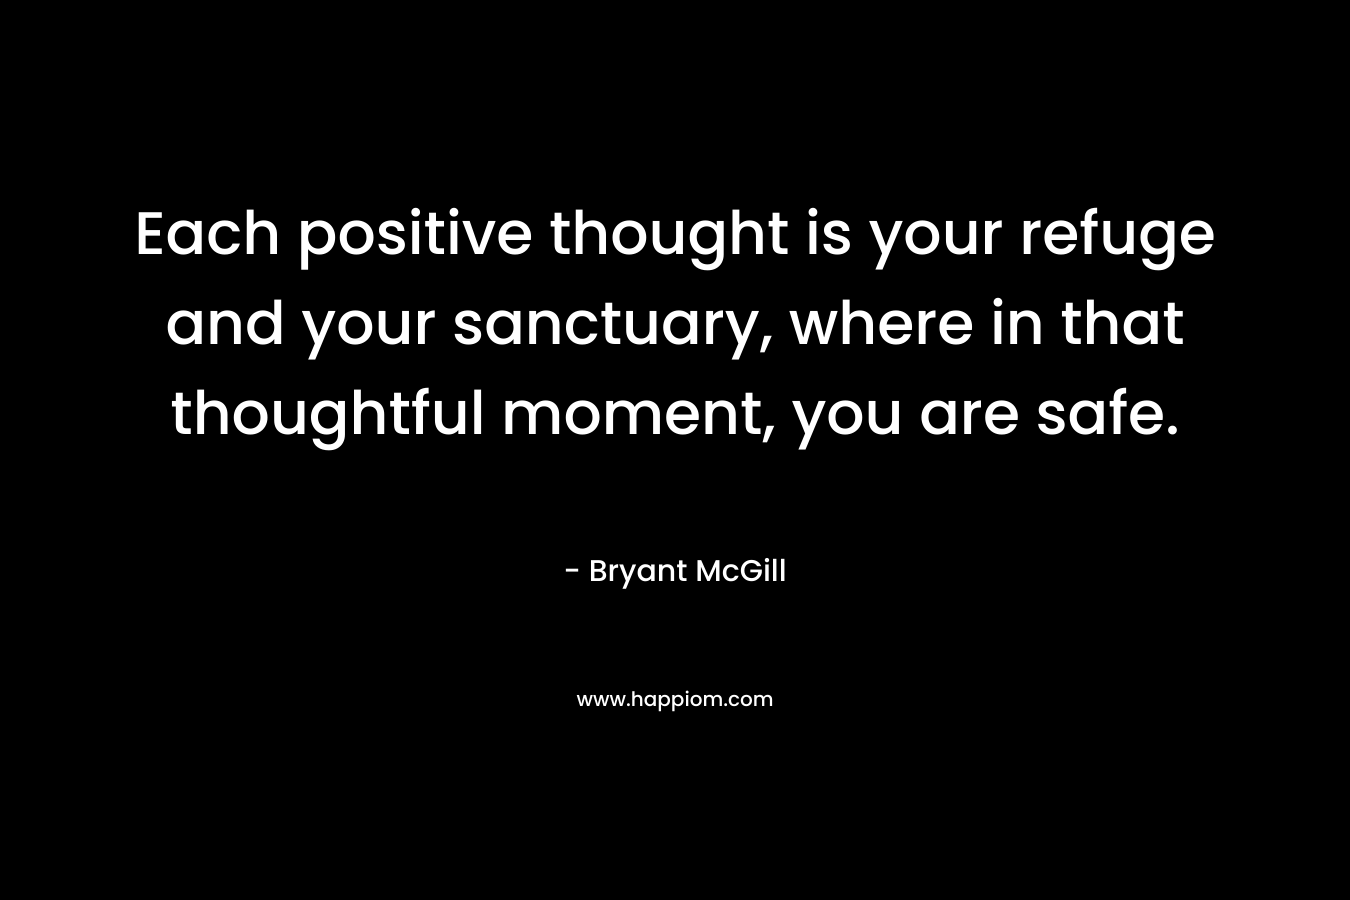 Each positive thought is your refuge and your sanctuary, where in that thoughtful moment, you are safe. – Bryant McGill